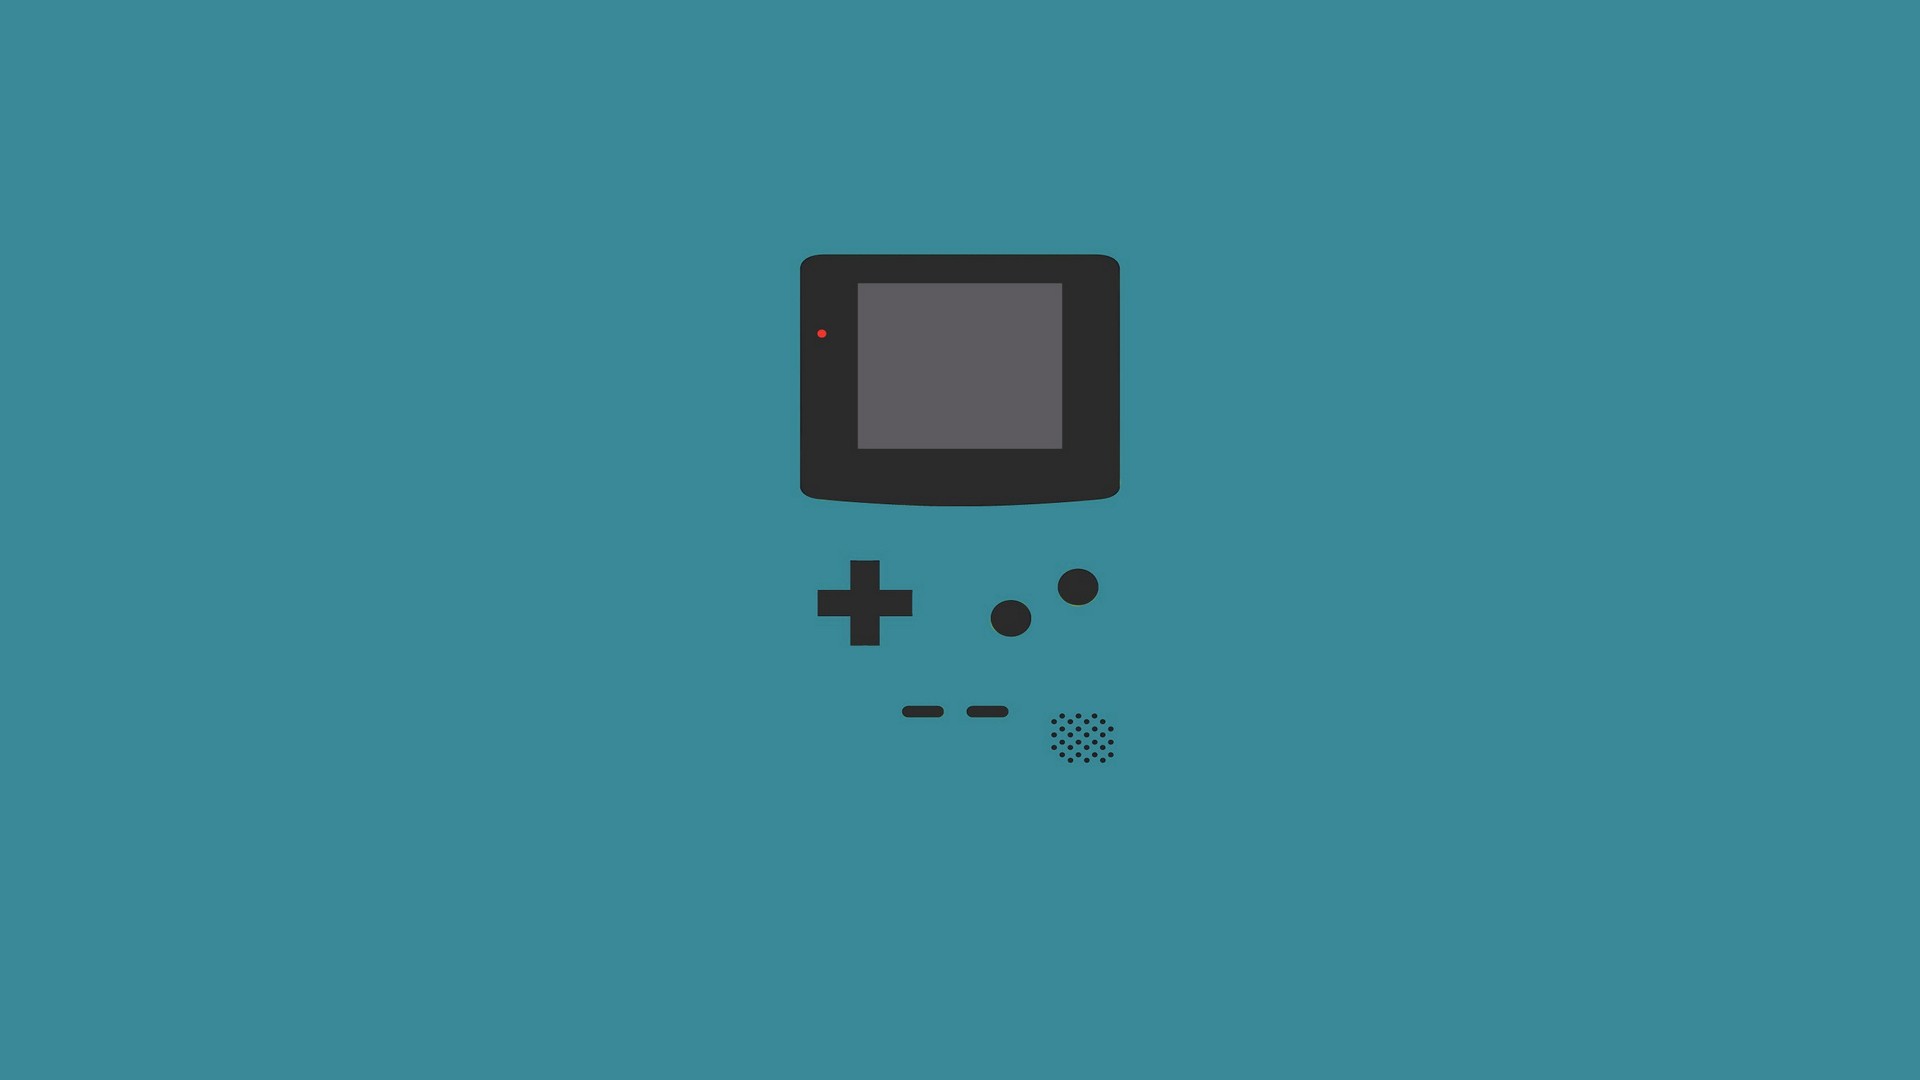 General 1920x1080 minimalism video games blue background retro games simple background GameBoy Color cyan background video game art Nintendo